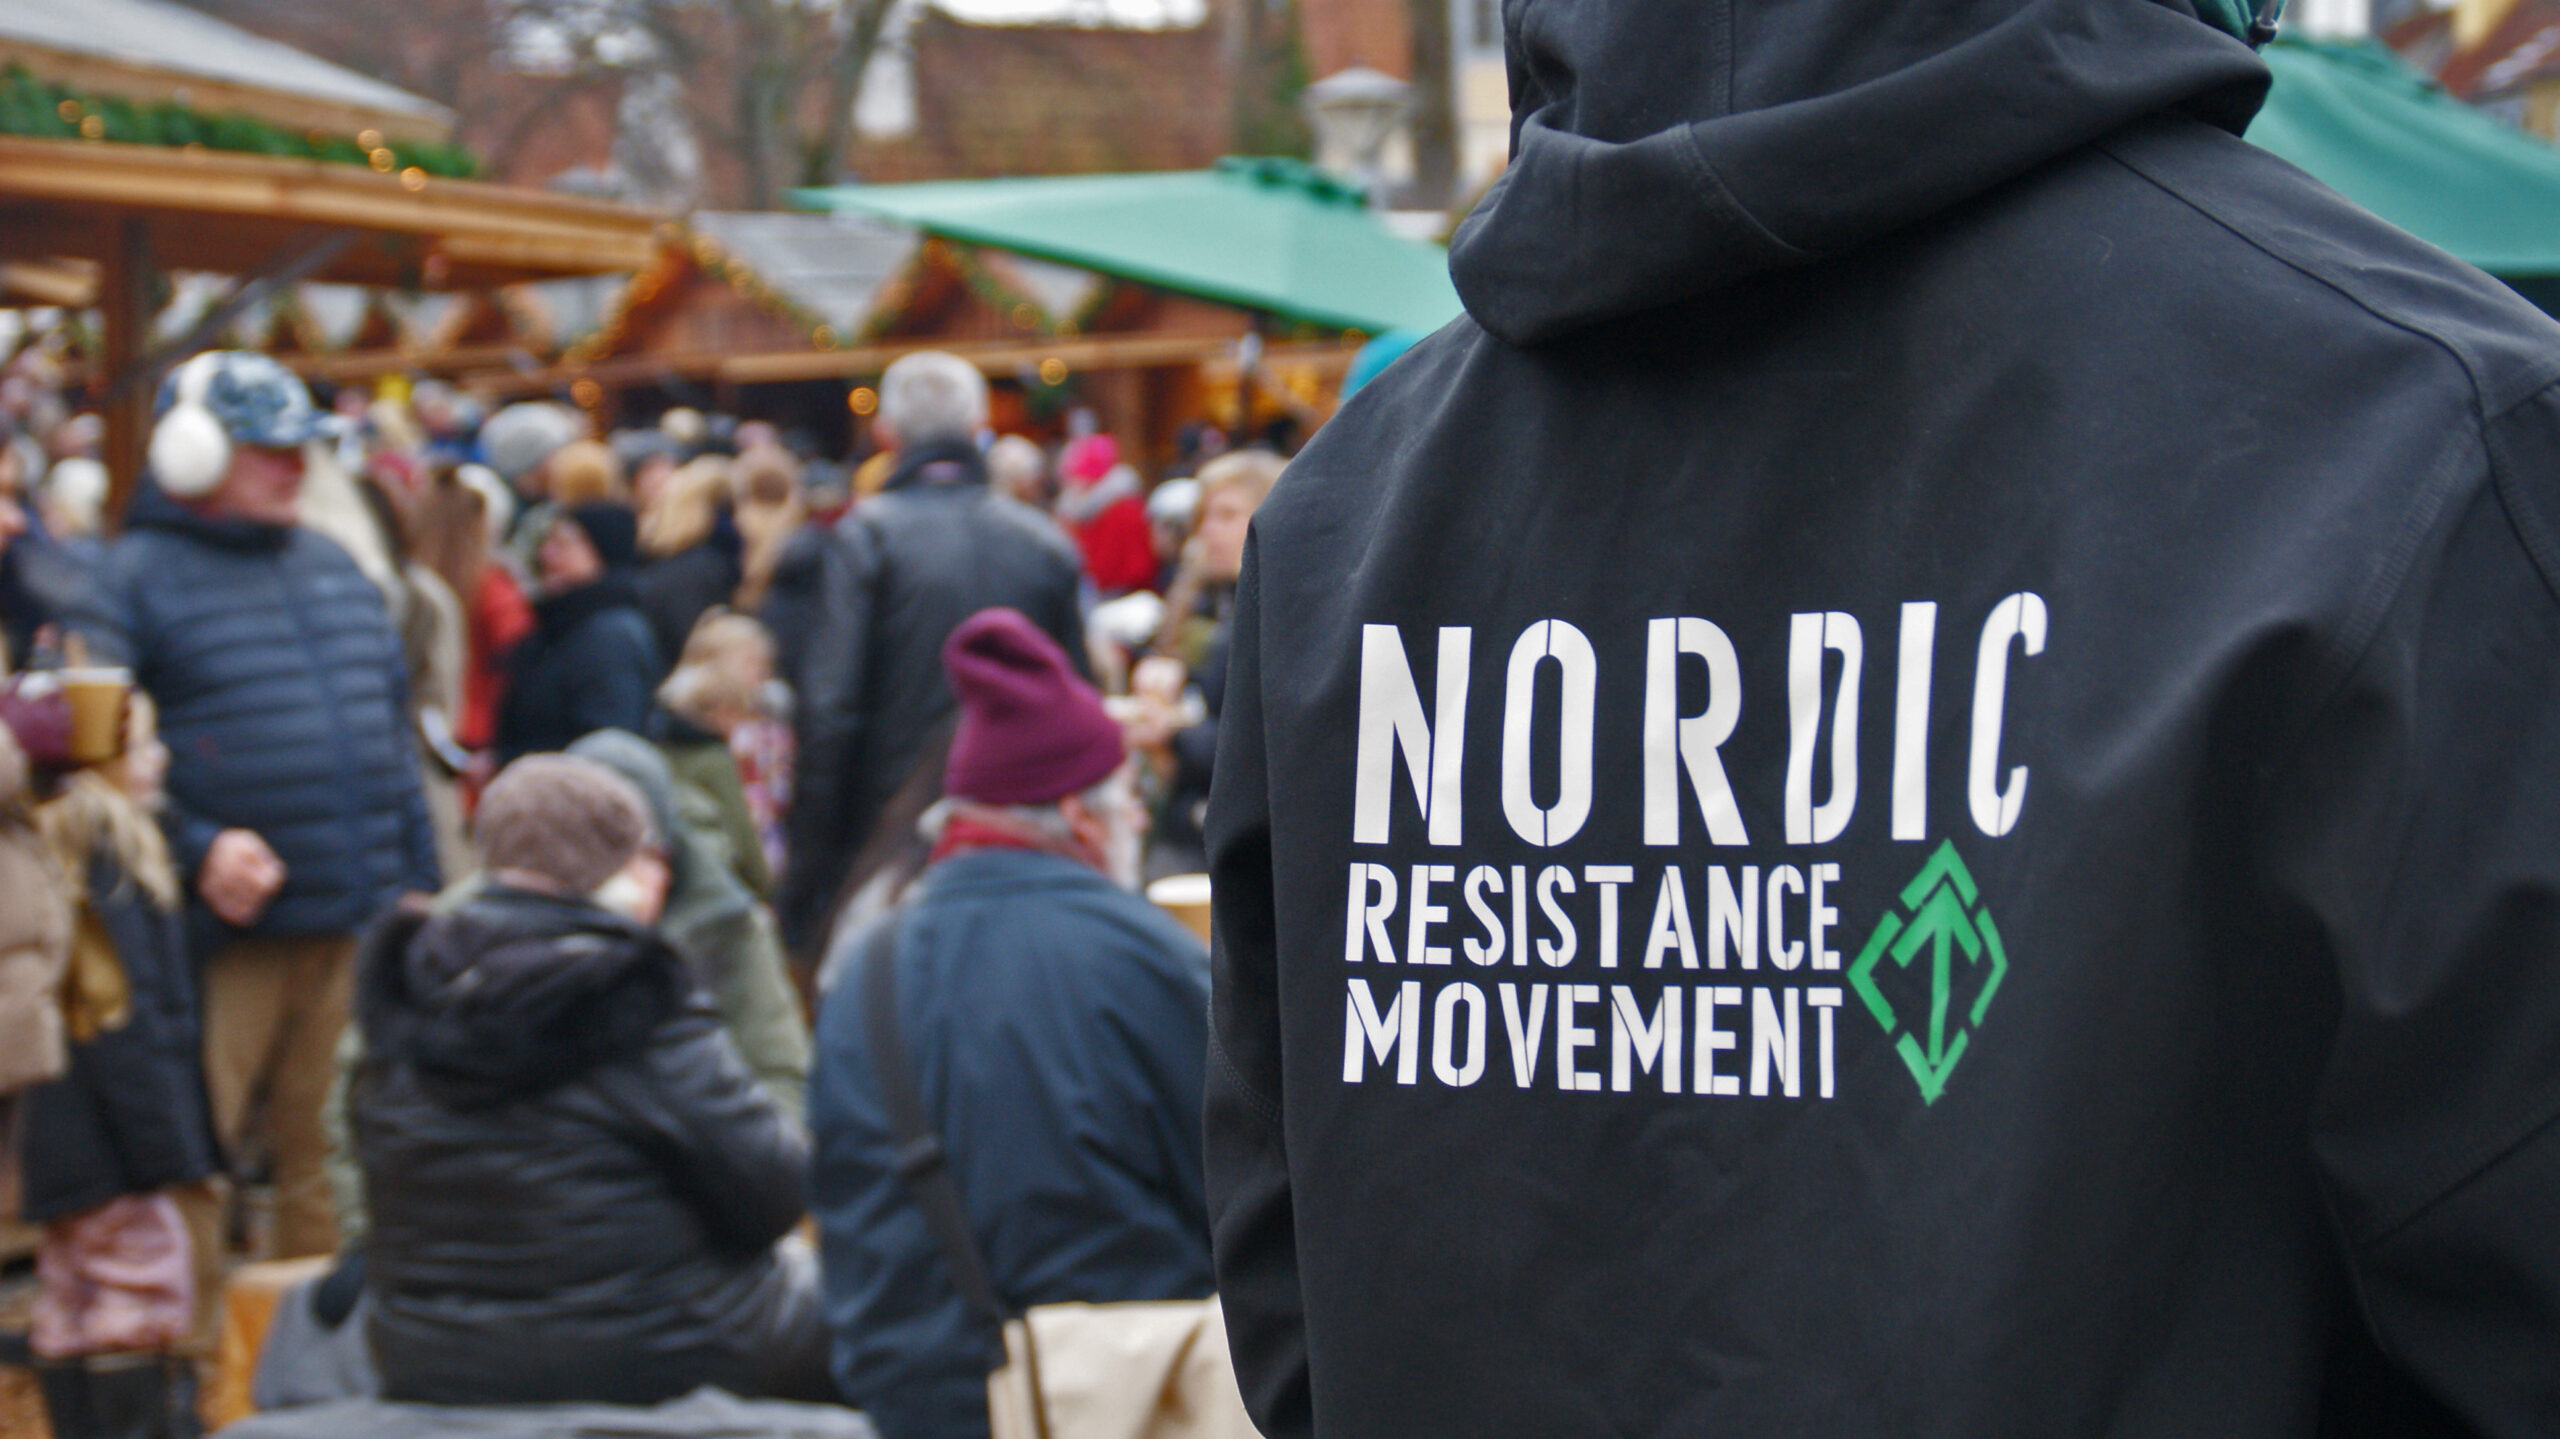 Nordic Resistance Movement activist with jacket at Odense Christmas Market, Denmark